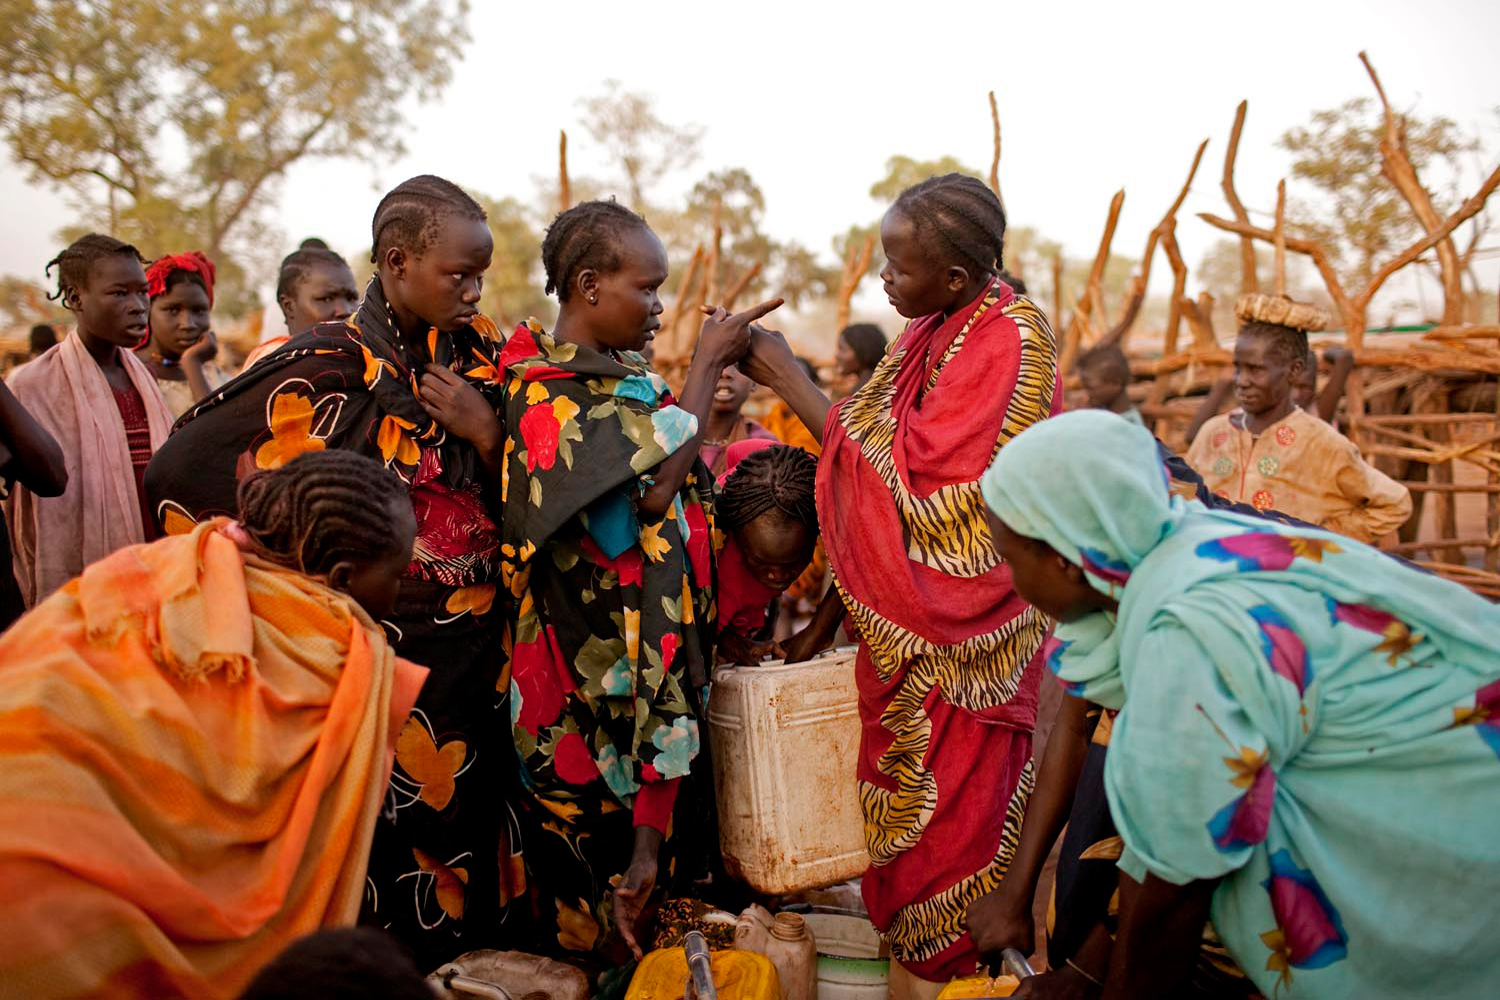 Two Nuba women argue at a water point in the Yida refugee camp. Water is in extremely short supply in the camp, which has daily temperatures of more than 115 degrees. Women and children often stand in line for up to ten hours in order to fill one jerry can. Arguments and fist fights are common.